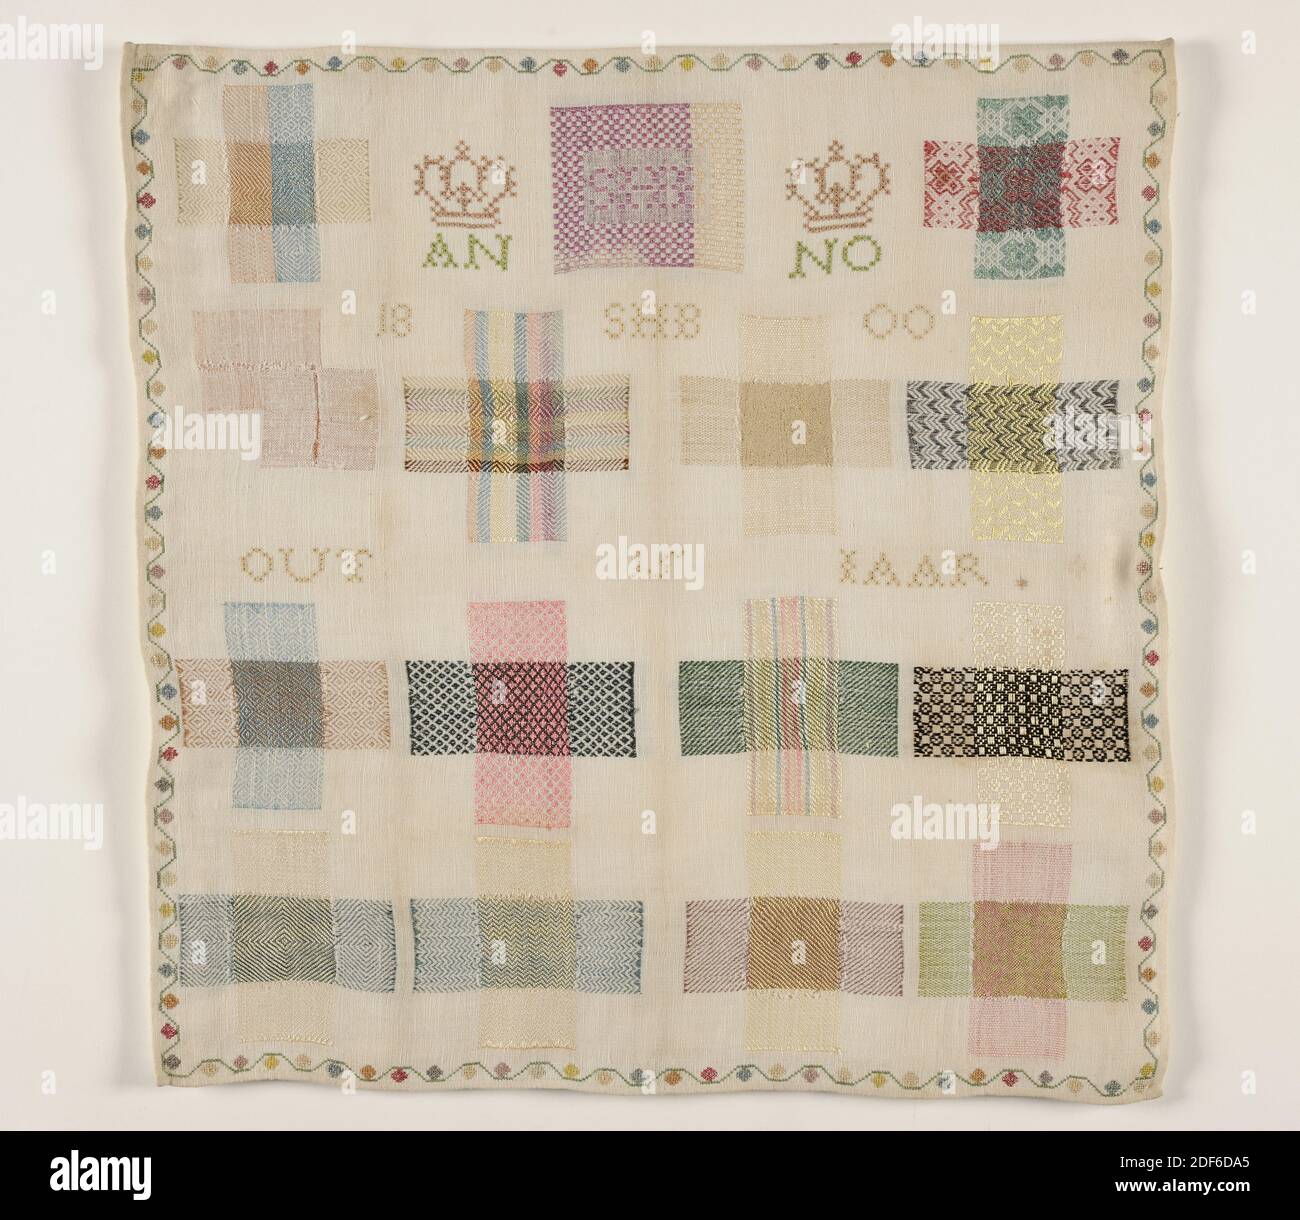 stoplap, Anonymous, 1800, cotton, silk, Stoplap made of cotton with silk thread in various colors. At the top center a doorstop with the letters SHB and on the left and right a crown in star stitch. Below and on the lap ANNO 18 SHB 00 OUT 15 IAAR. On the lap 13 cross-stops in twill, satin weave, diamond twill in check pattern, pointed twill, eyelets, twill with longitudinal stripe and plain weave. With a wavy edge with balls all around, the corners are not correct and a hem on four sides, General: 53 x 52cm (530 x 520mm Stock Photo